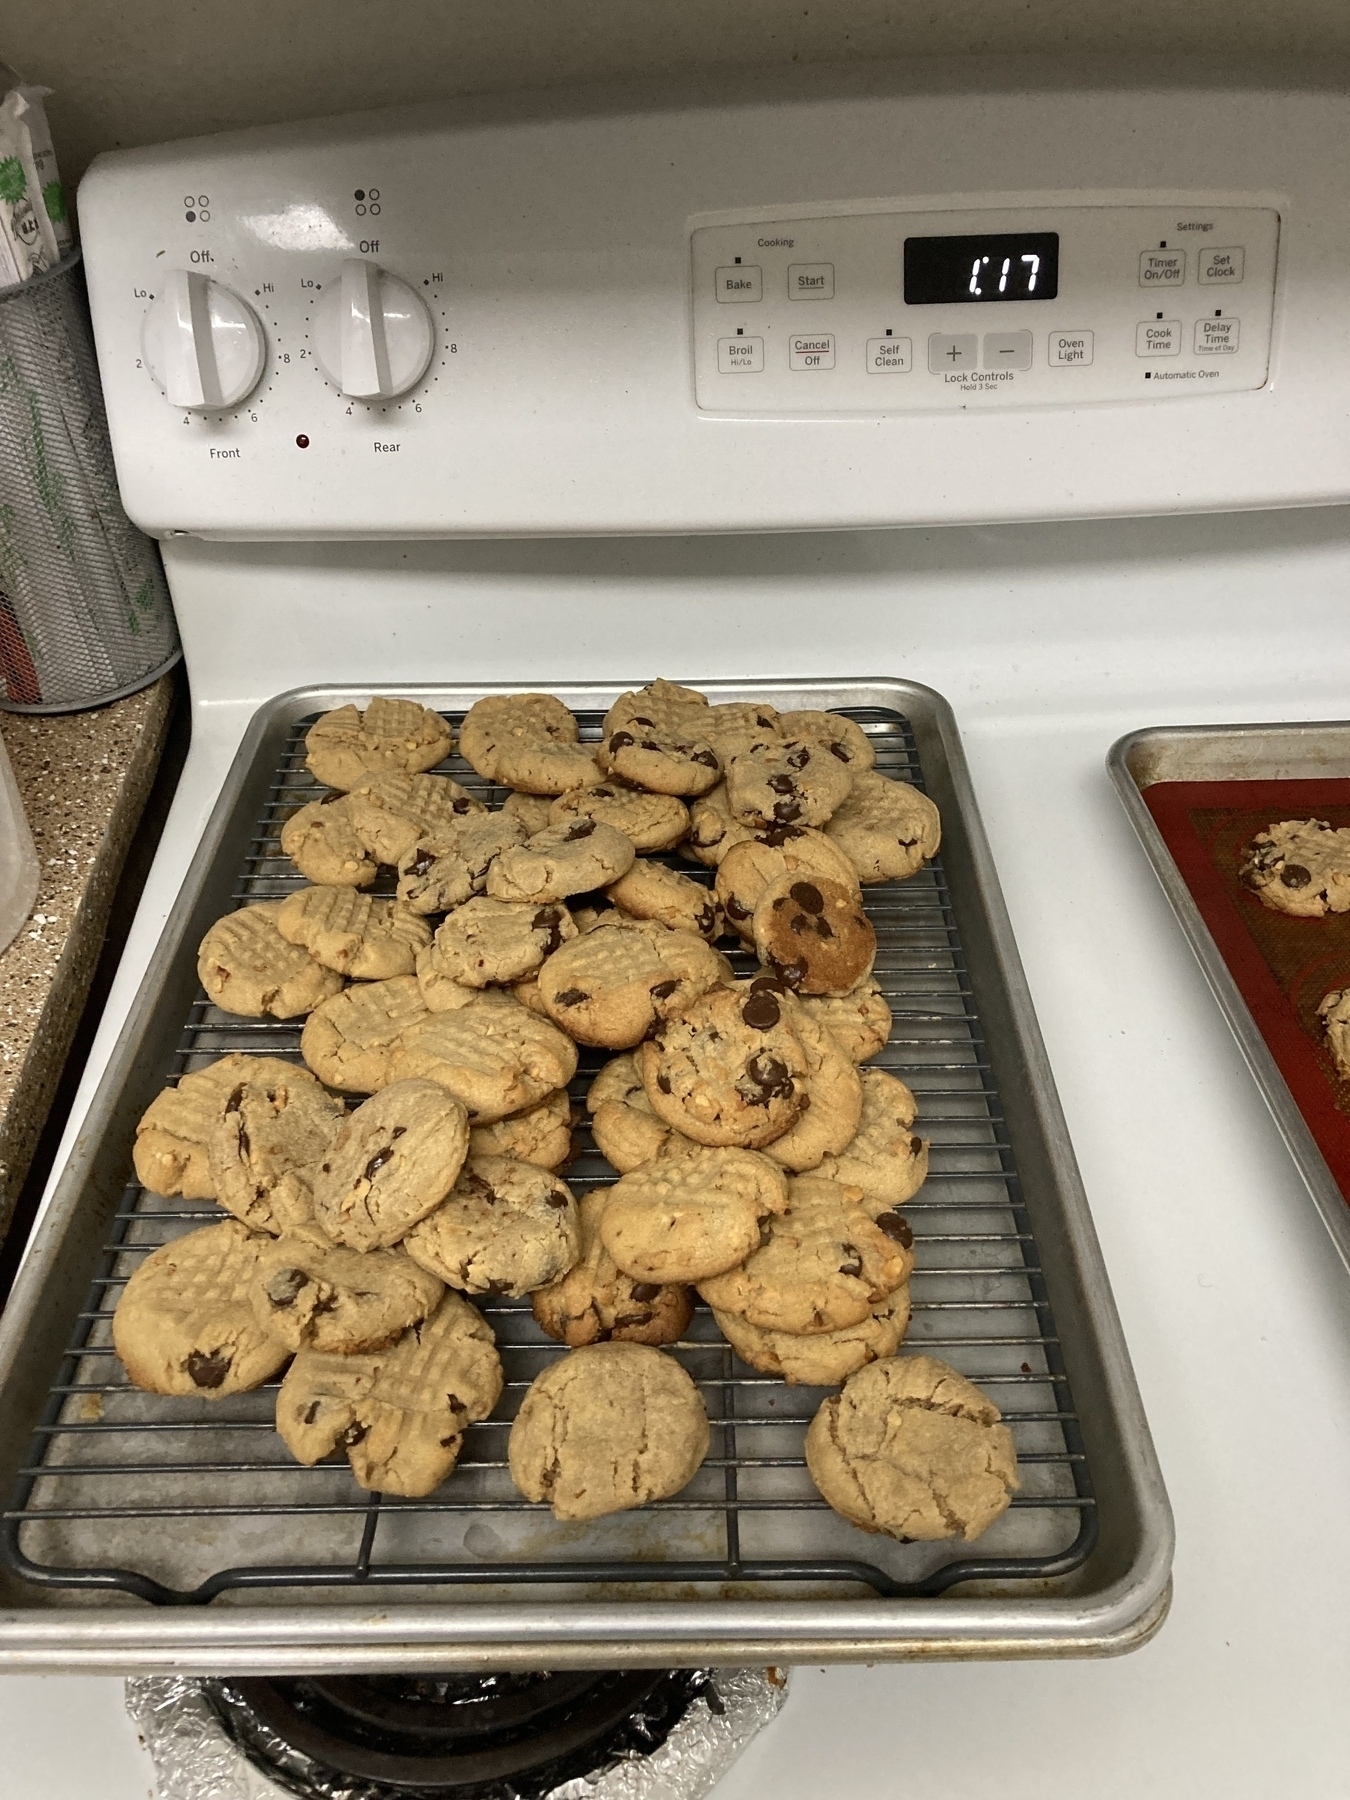 A batch of cookies, including ones with chocolate chips, are cooling on a wire rack placed over a baking sheet in a kitchen.